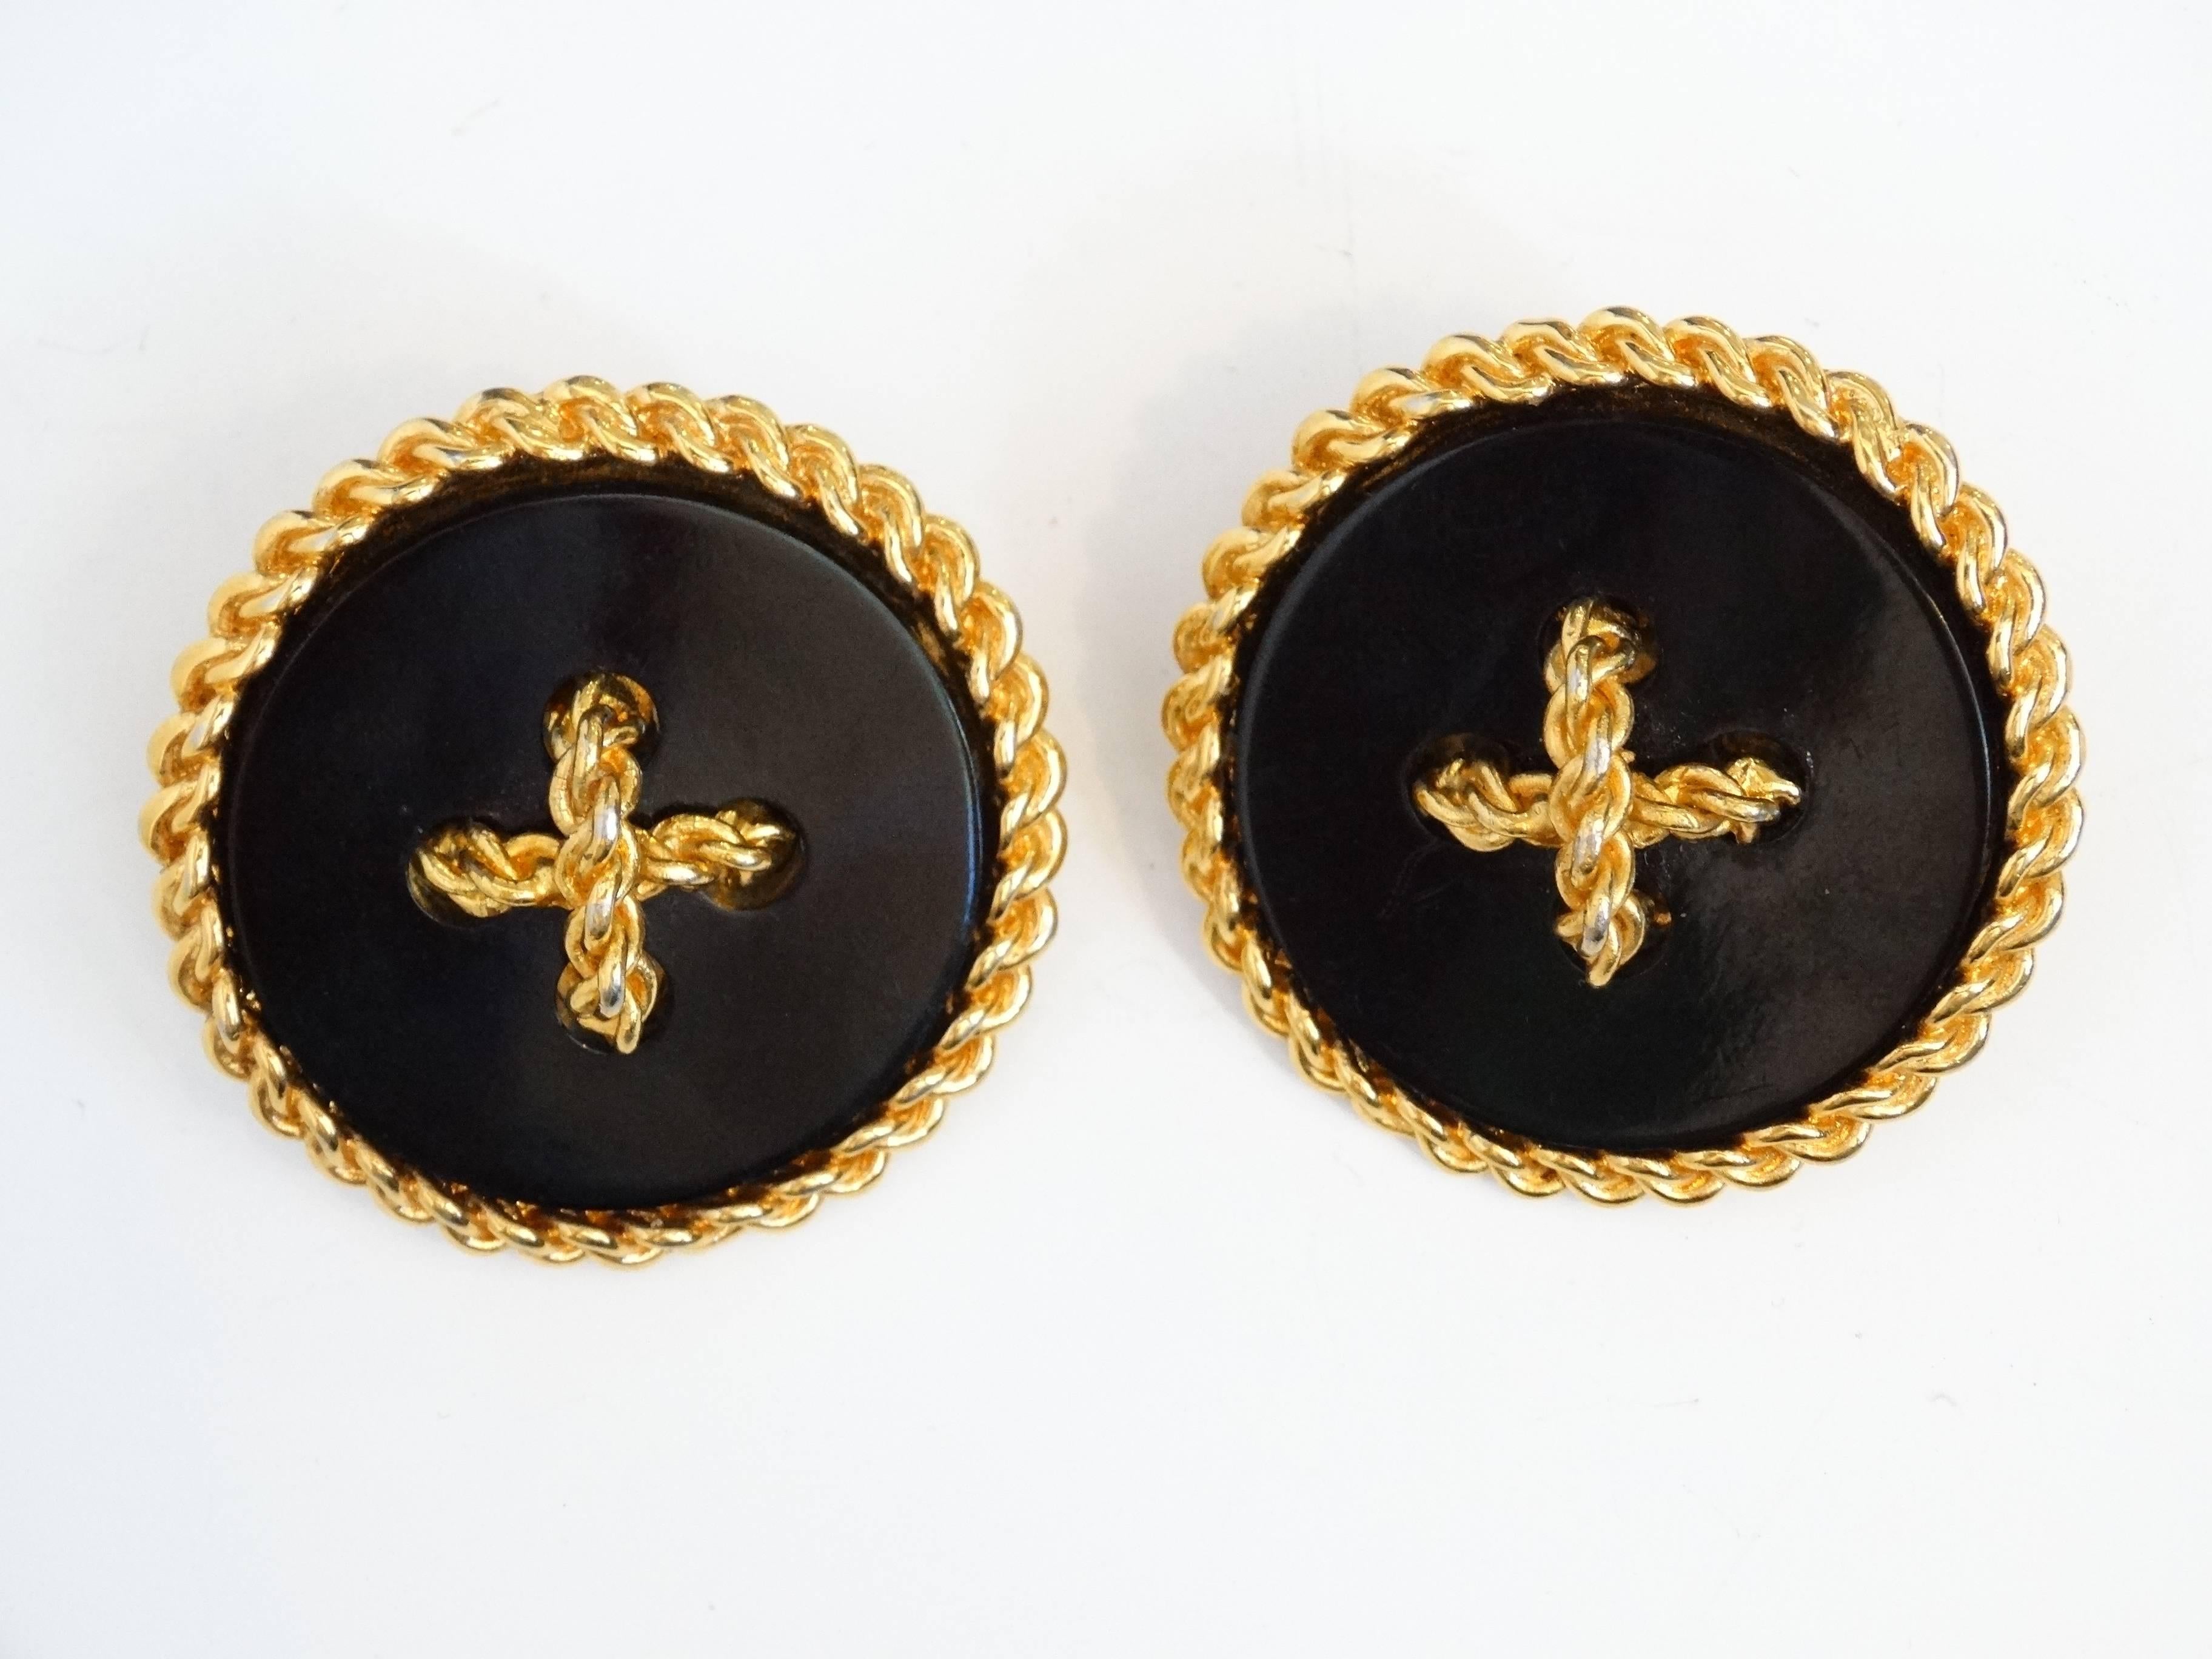 Large beautiful vintage Coco Chanel 80's black button and gold plated earrings. The Chanel signature inside the oval cartouche is the mark used by the House of Chanel on couture jewelry pieces. The numbers signify the collection design is by